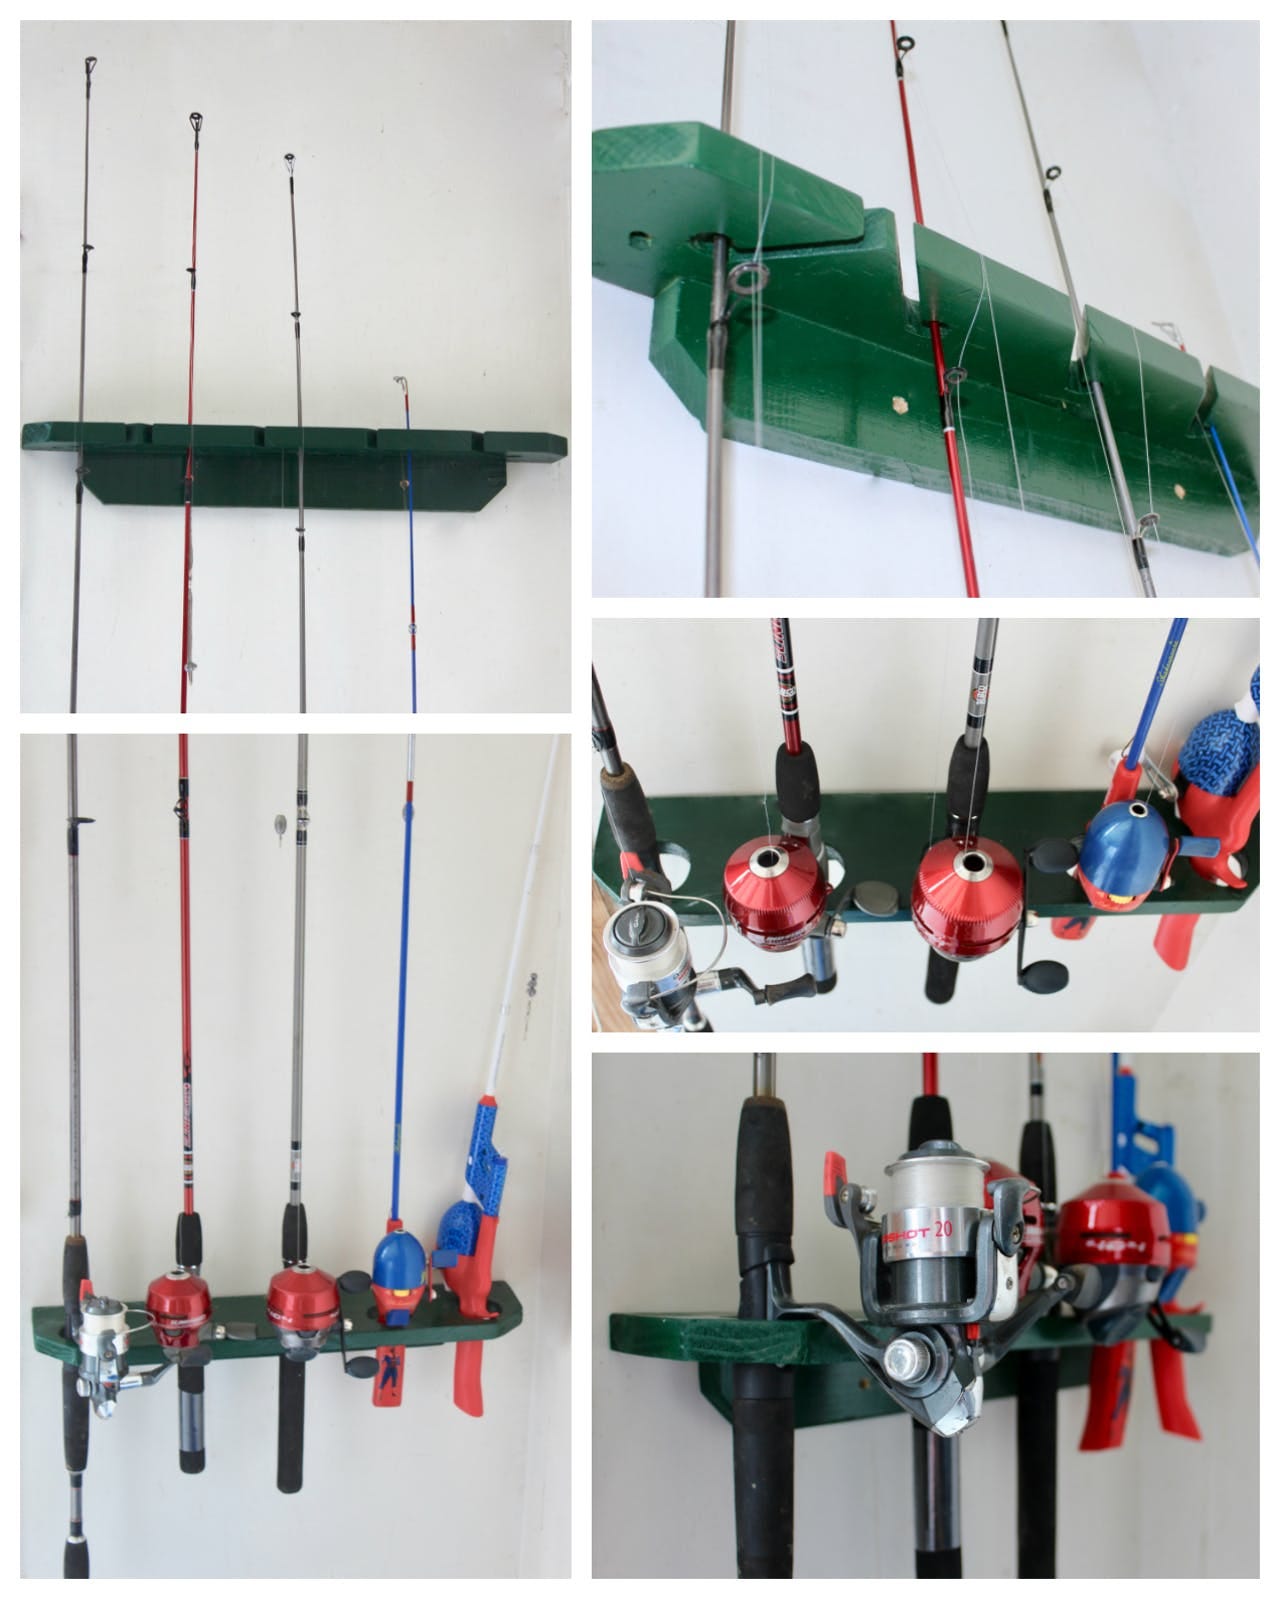 DIY Fishing Pole Holder For Free. Step by Step instructions to